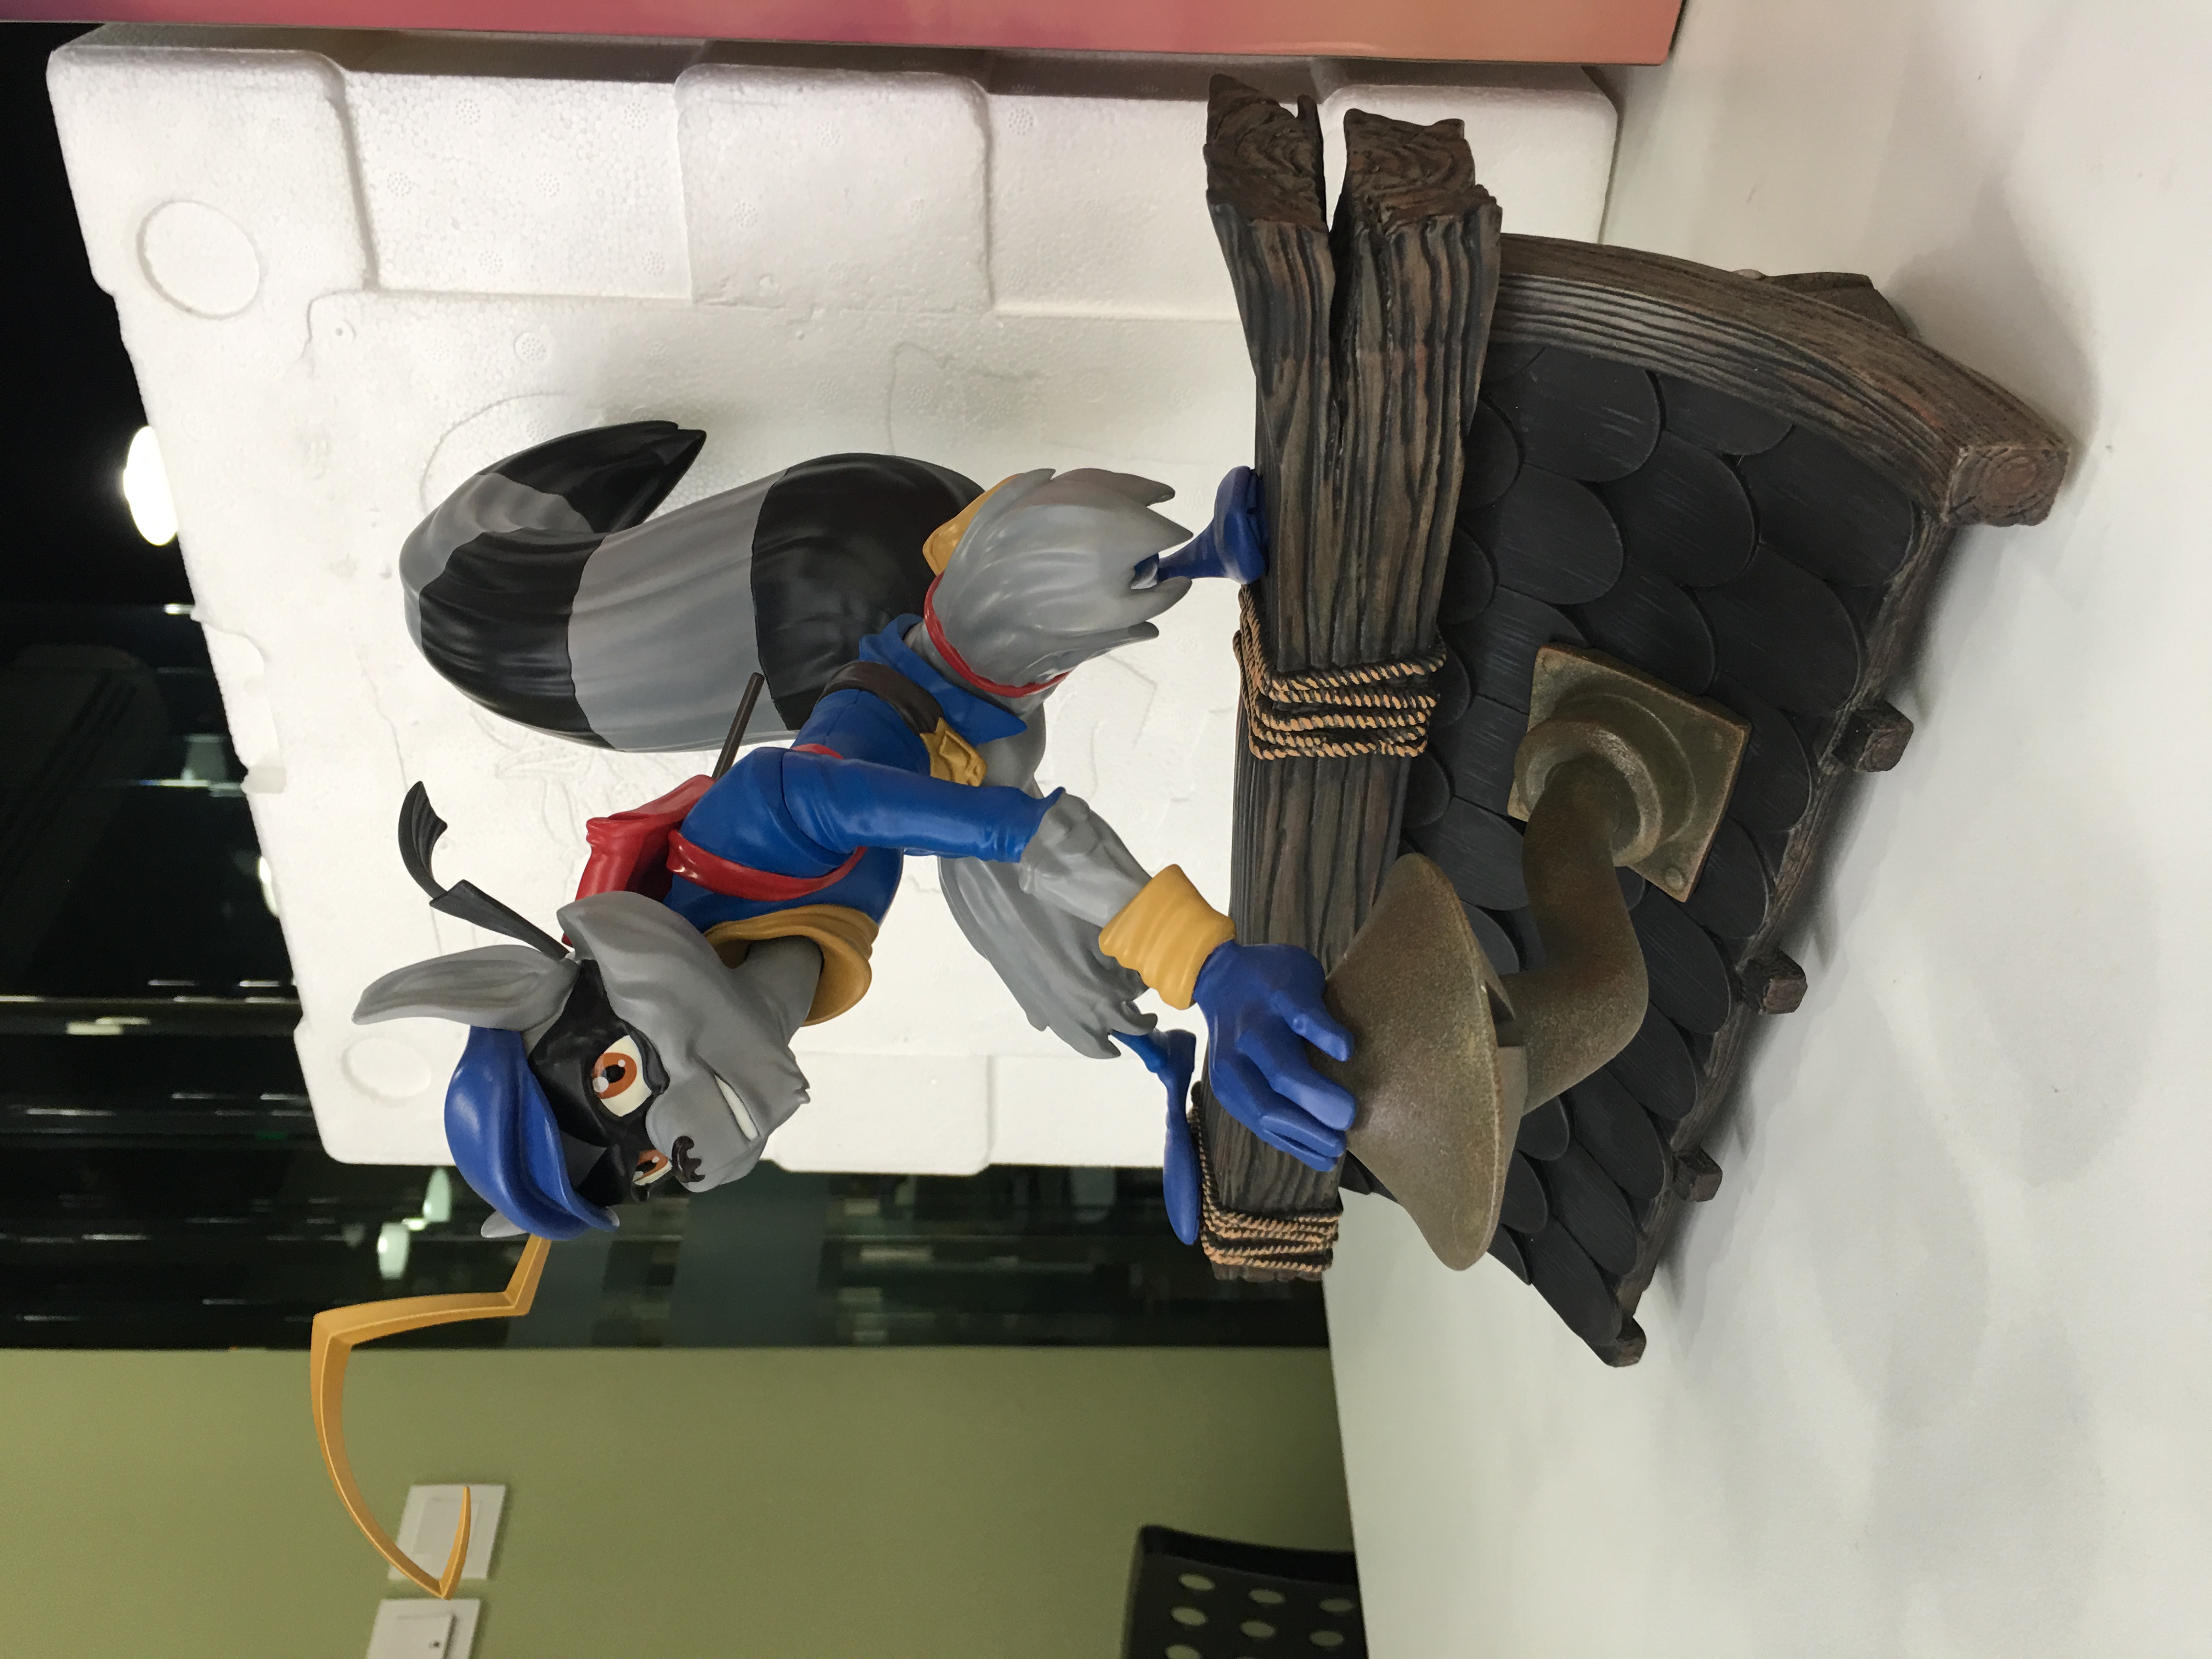 Sly Cooper statue